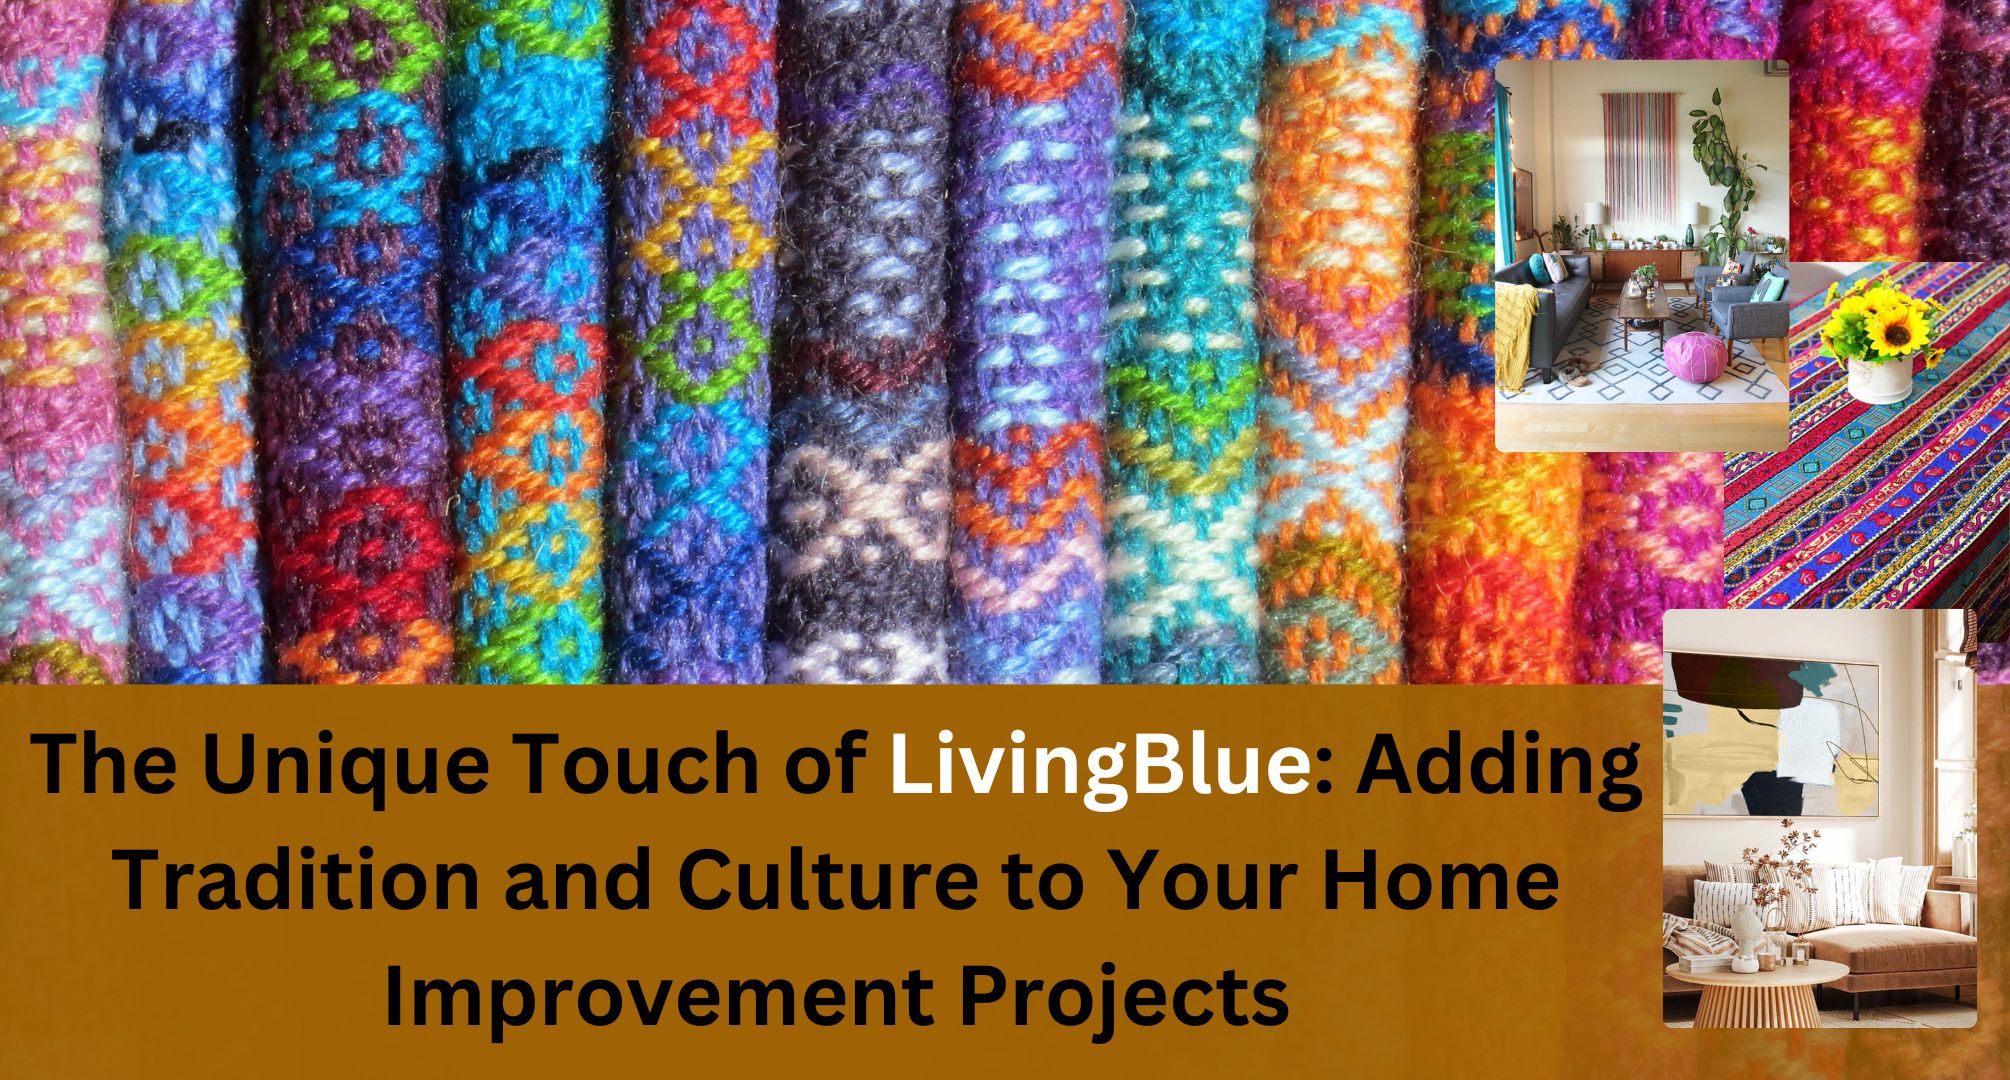 The Unique Touch of LivingBlue: Adding Tradition and Culture to Your Home Improvement Projects